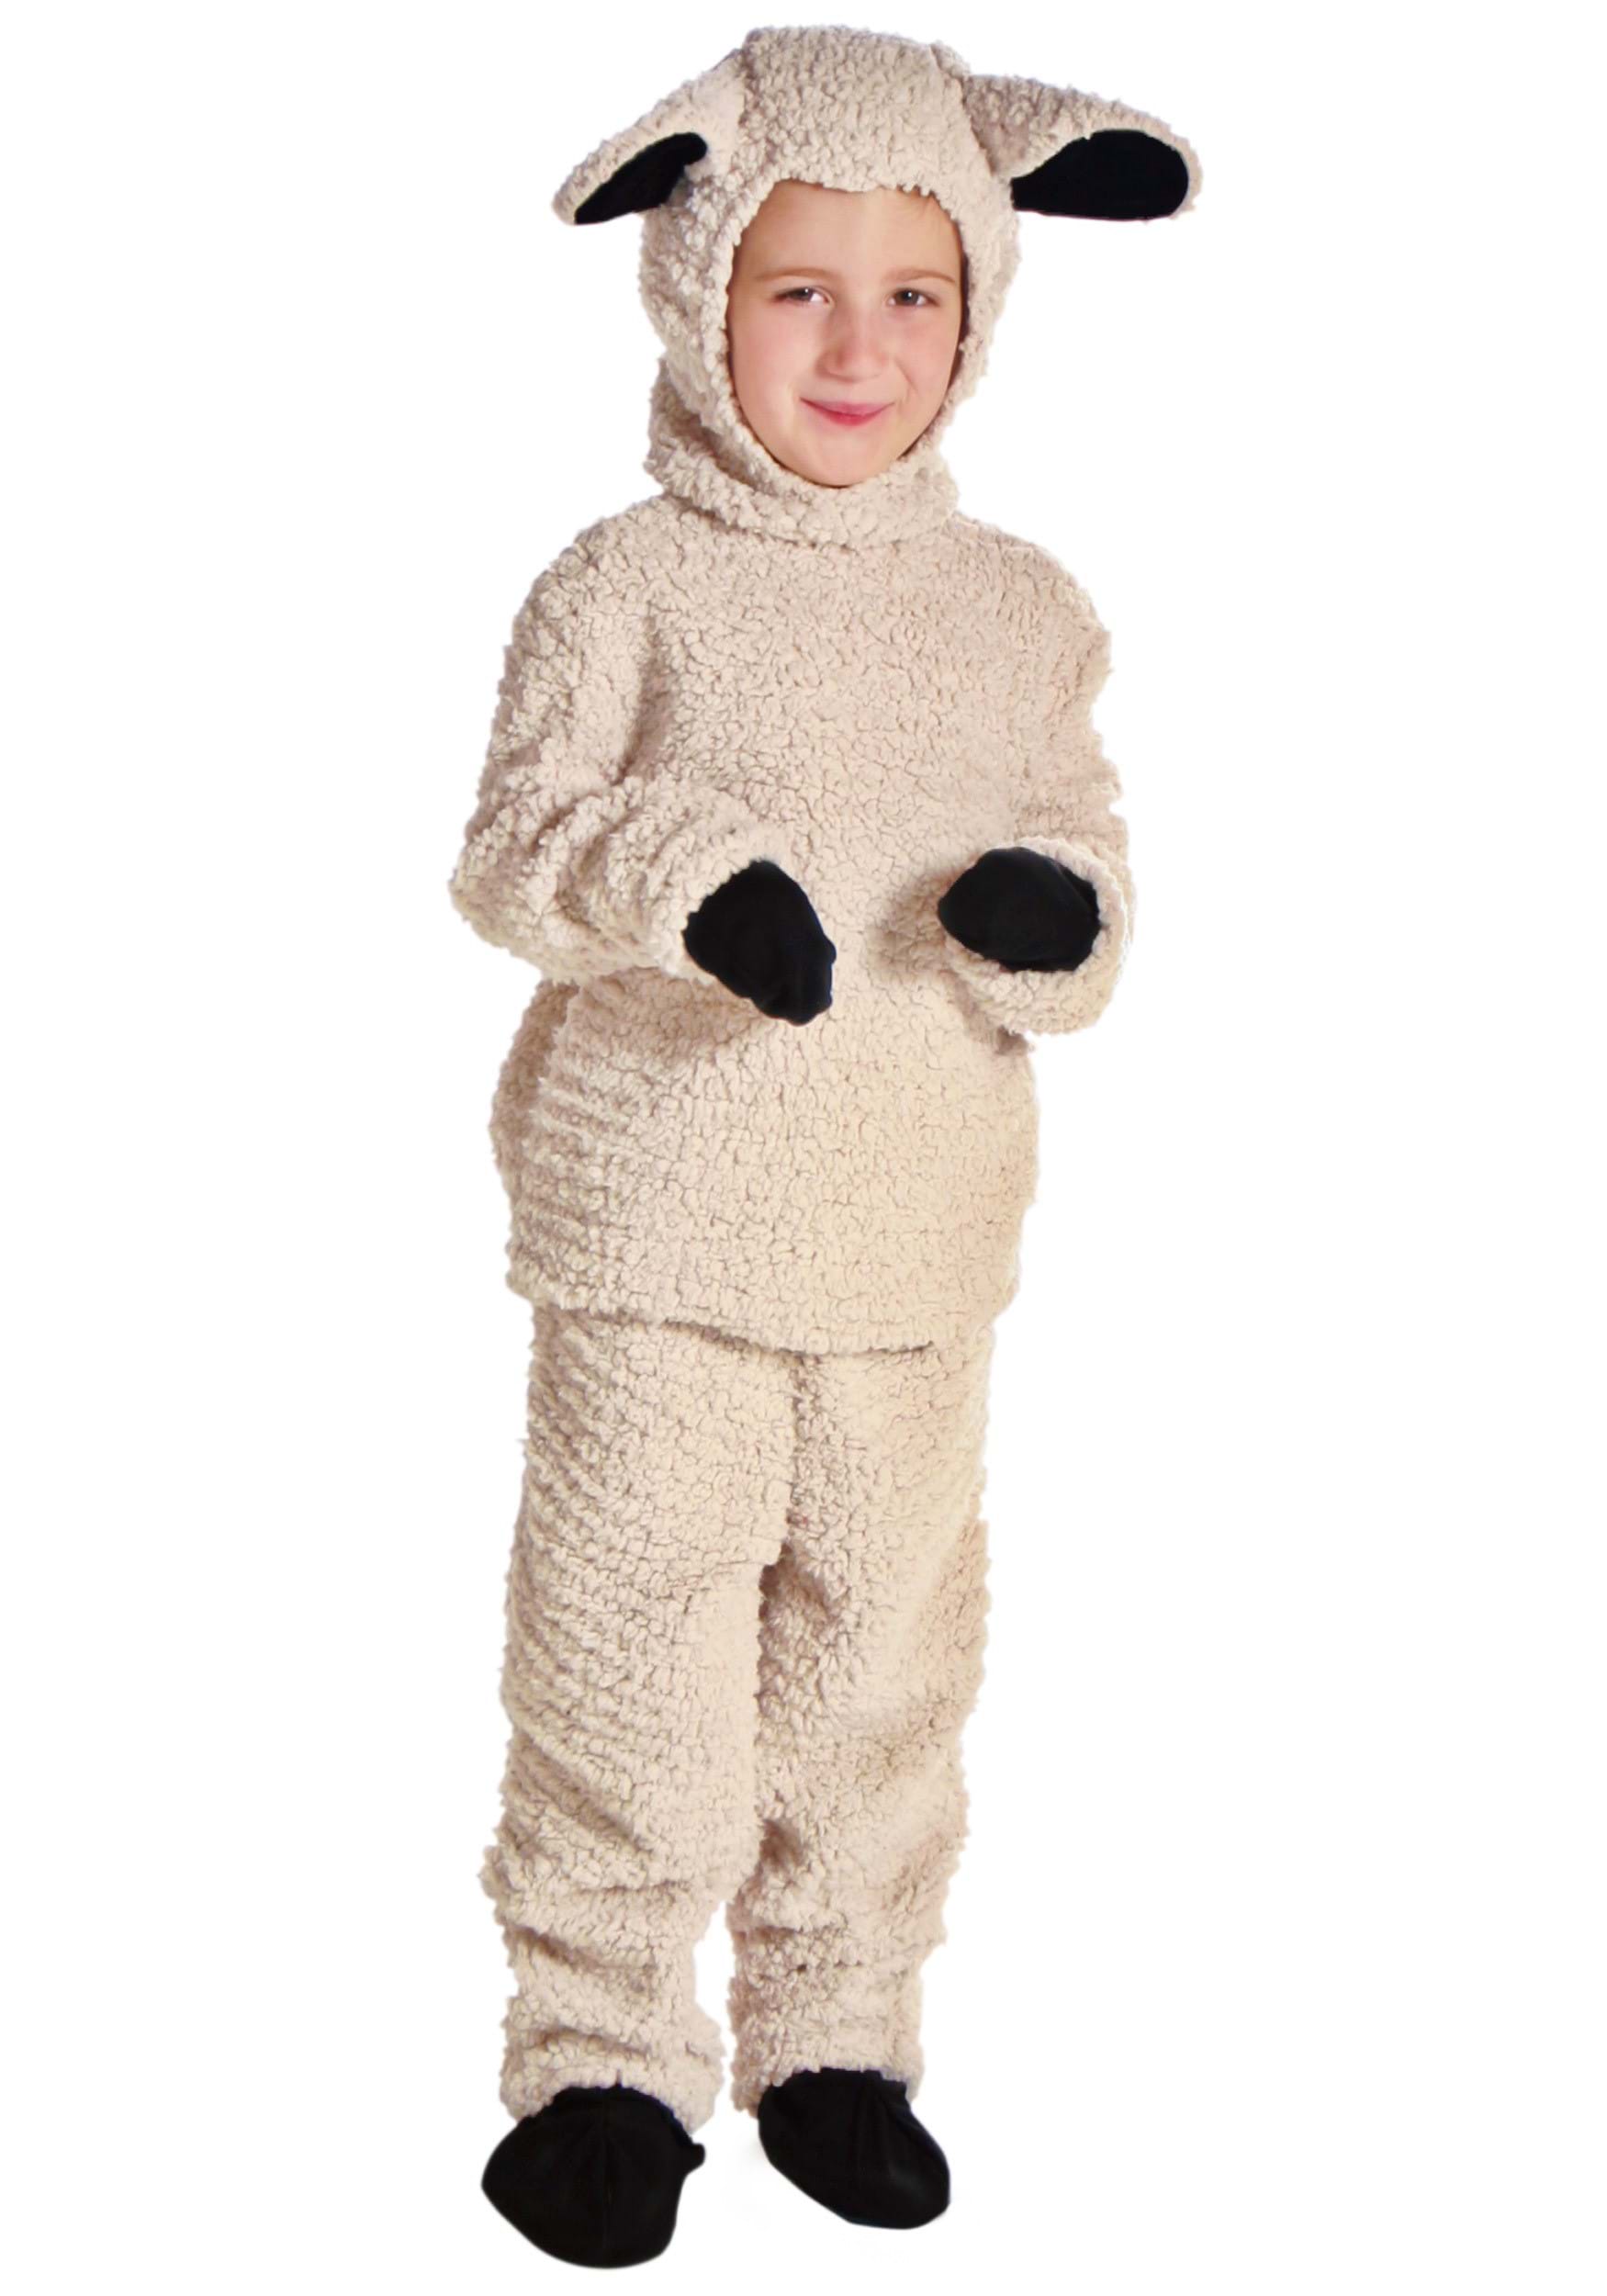 Woolly Sheep Costume for Kids | Exclusive | Made By Us Costume